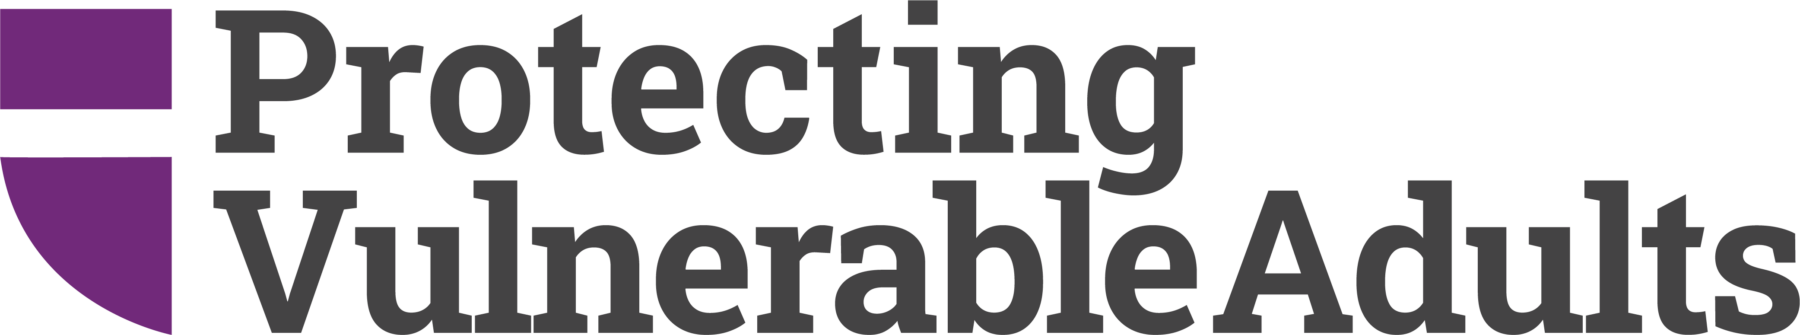 Protecting Vulnerable Adults Logo - Color - Stacked